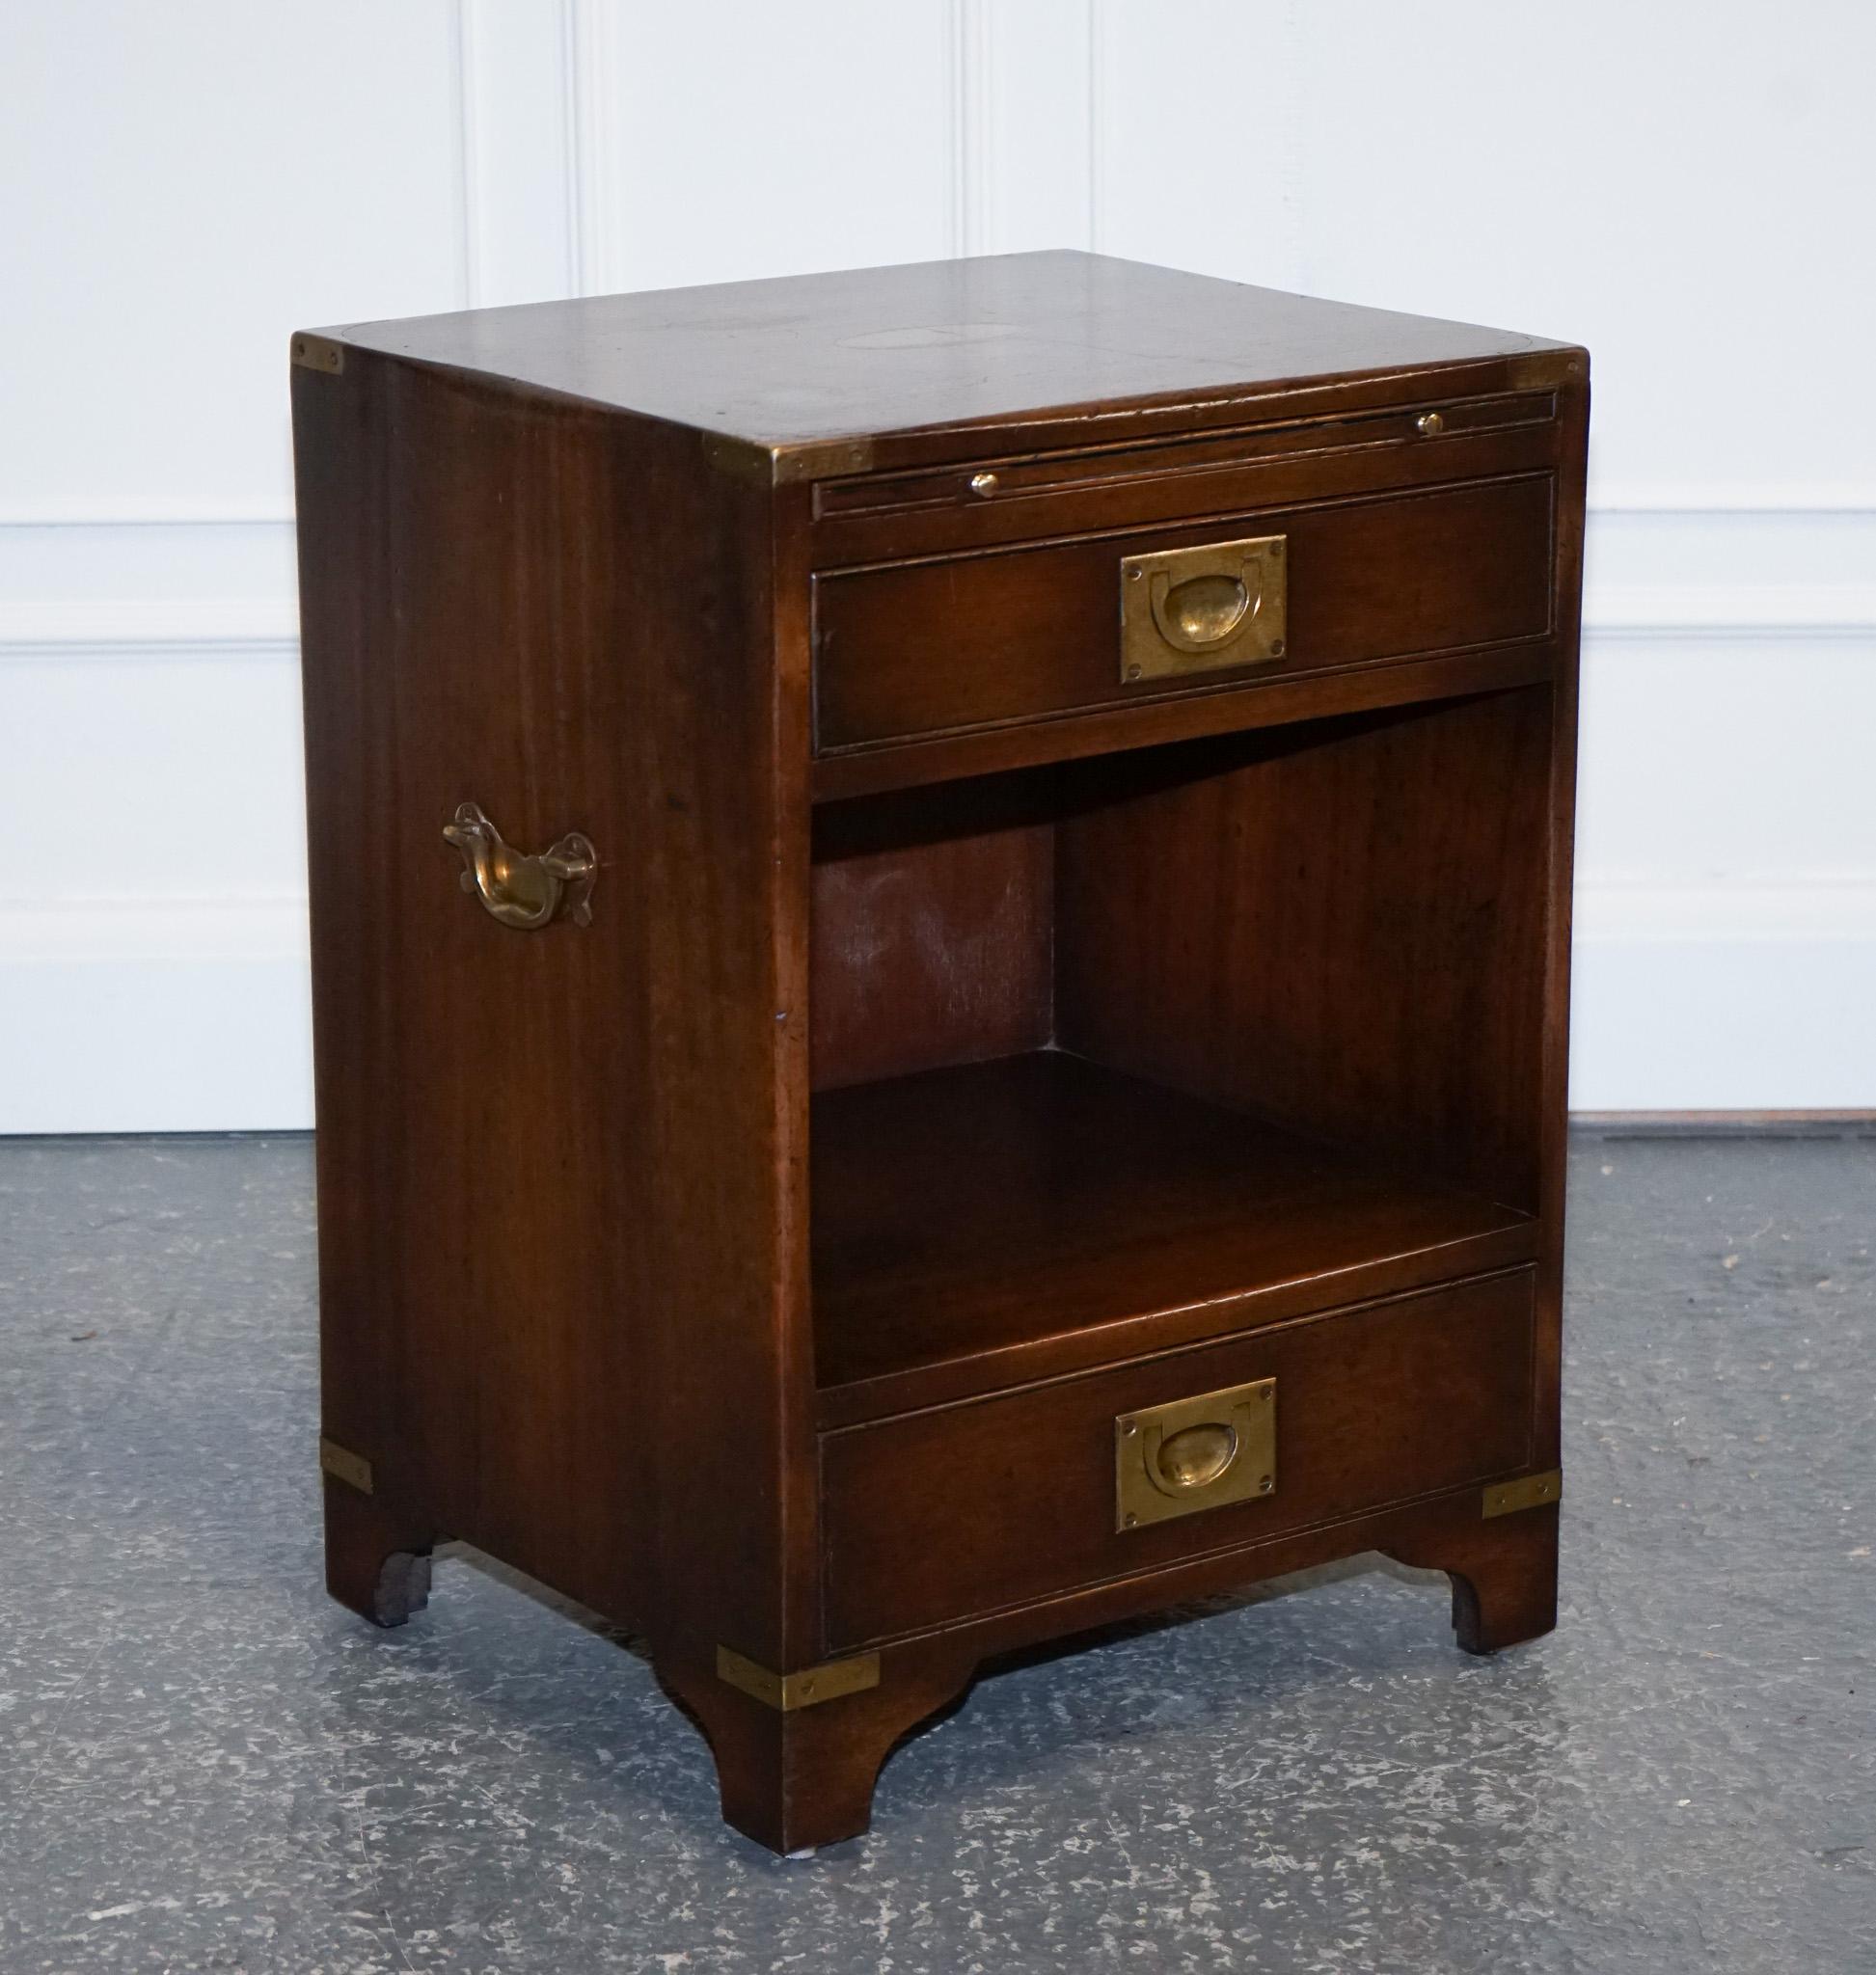 We are excited to present this outstanding vintage military campaign mahogany bedside end table.

This vintage Harrods Kennedy military campaign mahogany bedside end table is a true statement piece for any bedroom. It features two drawers and an